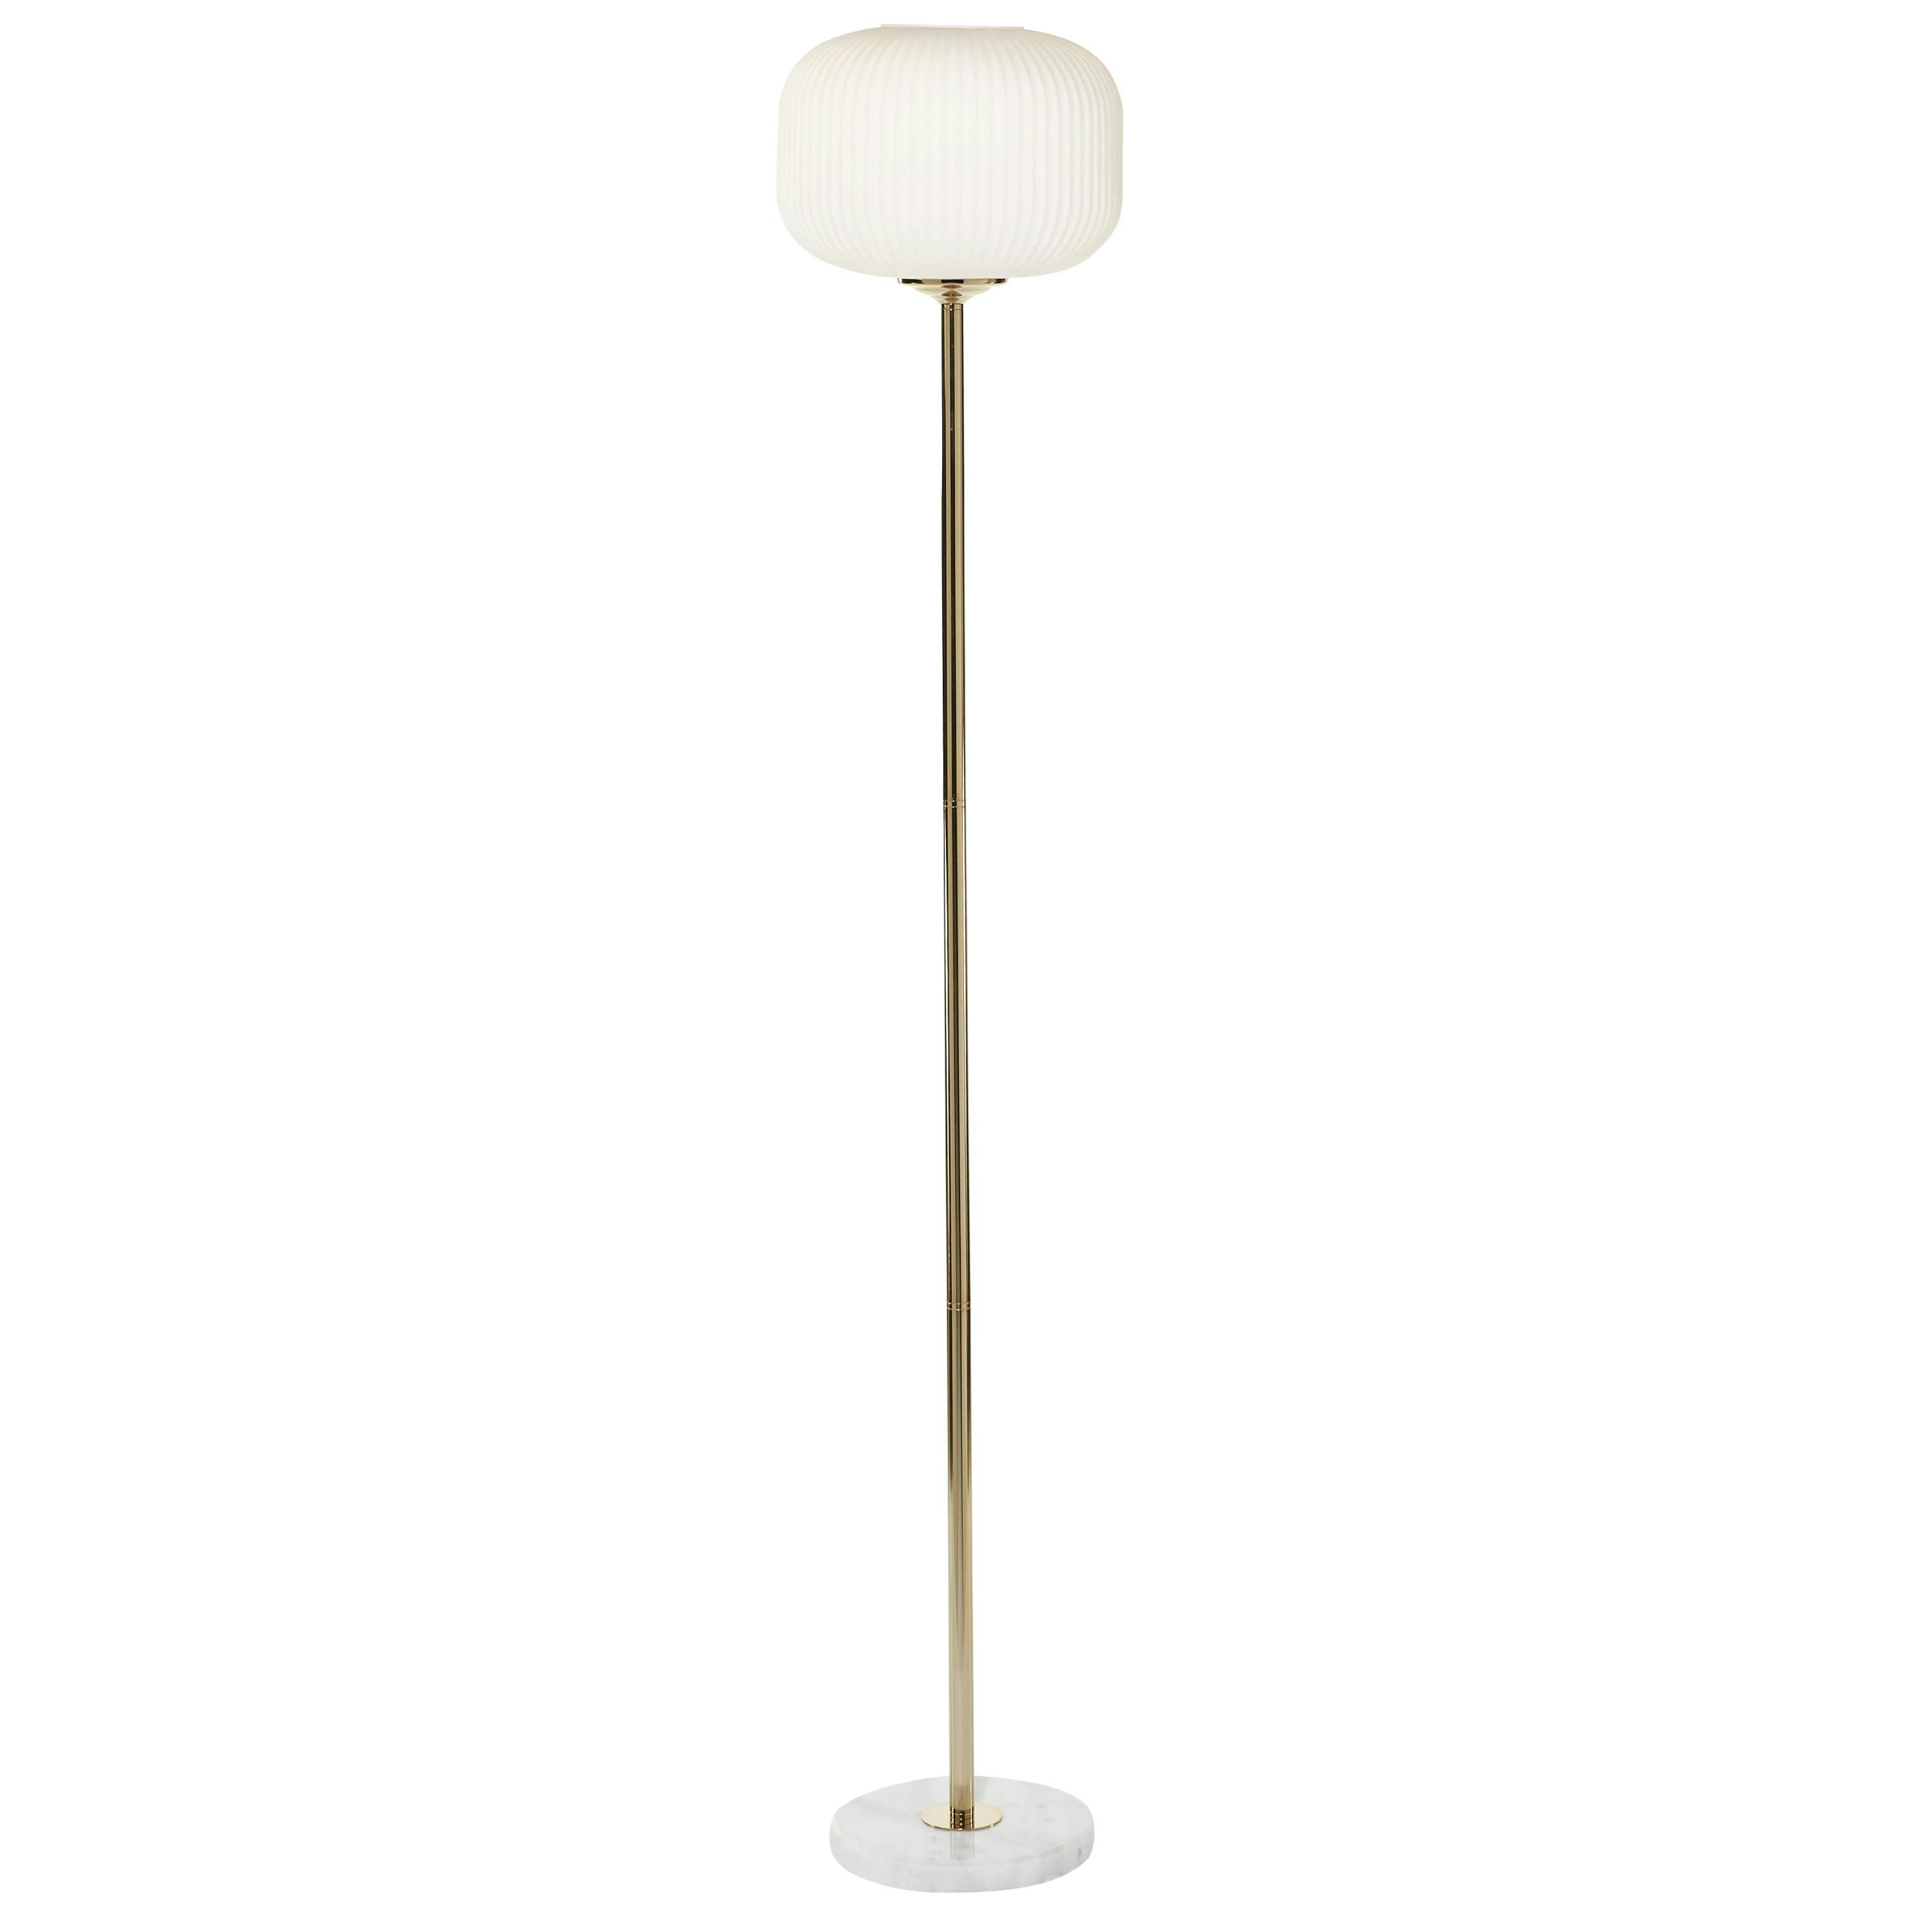 Elegant 64" Torchiere White Floor Lamp with Frosted Glass Shade